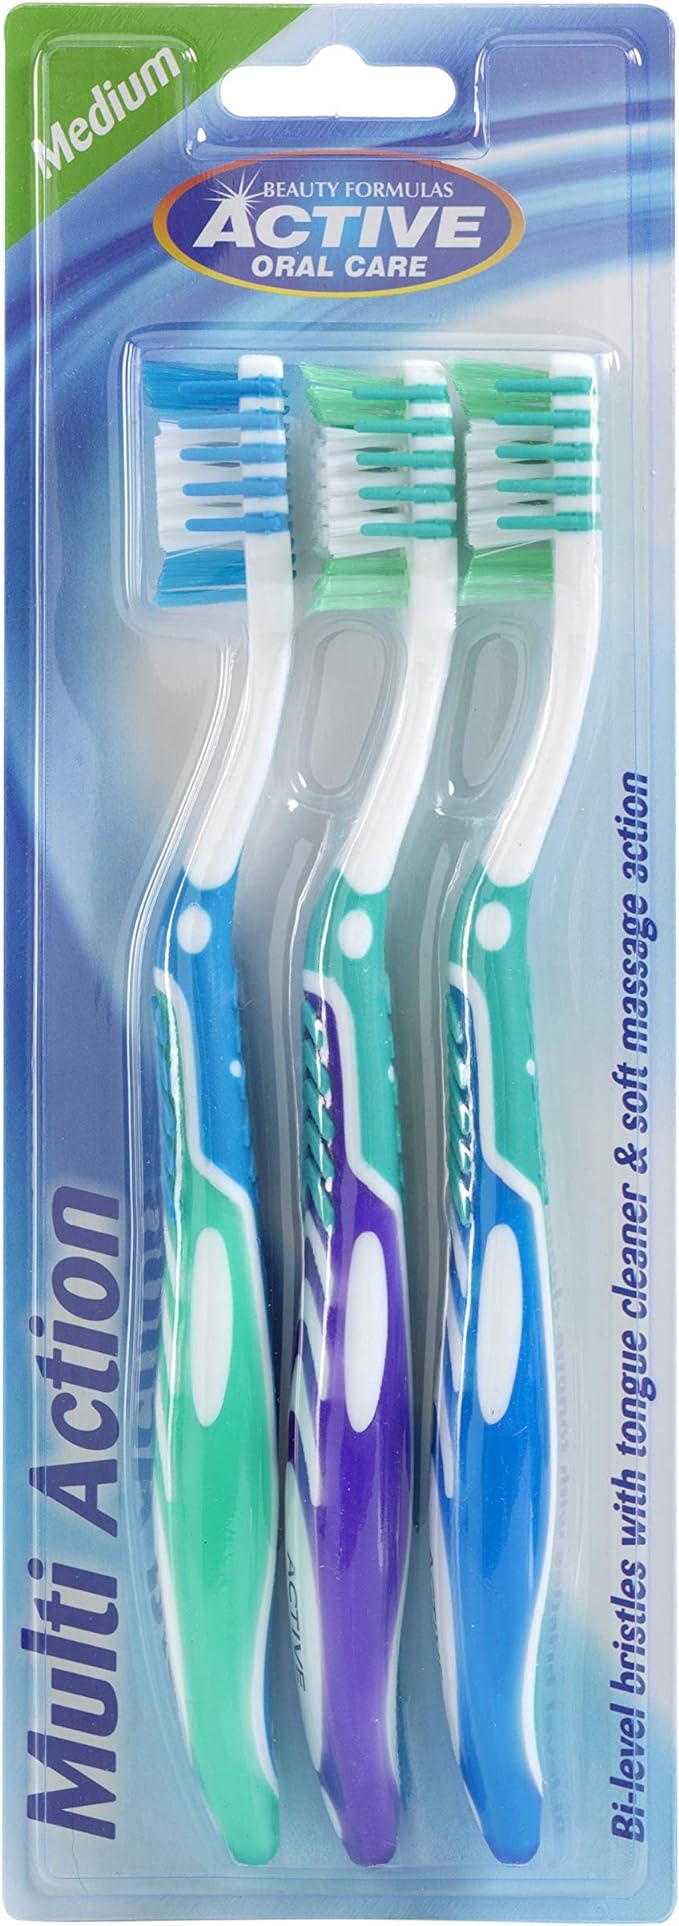 Active Oral Care Multi-Action Toothbrushes (Medium) X 3